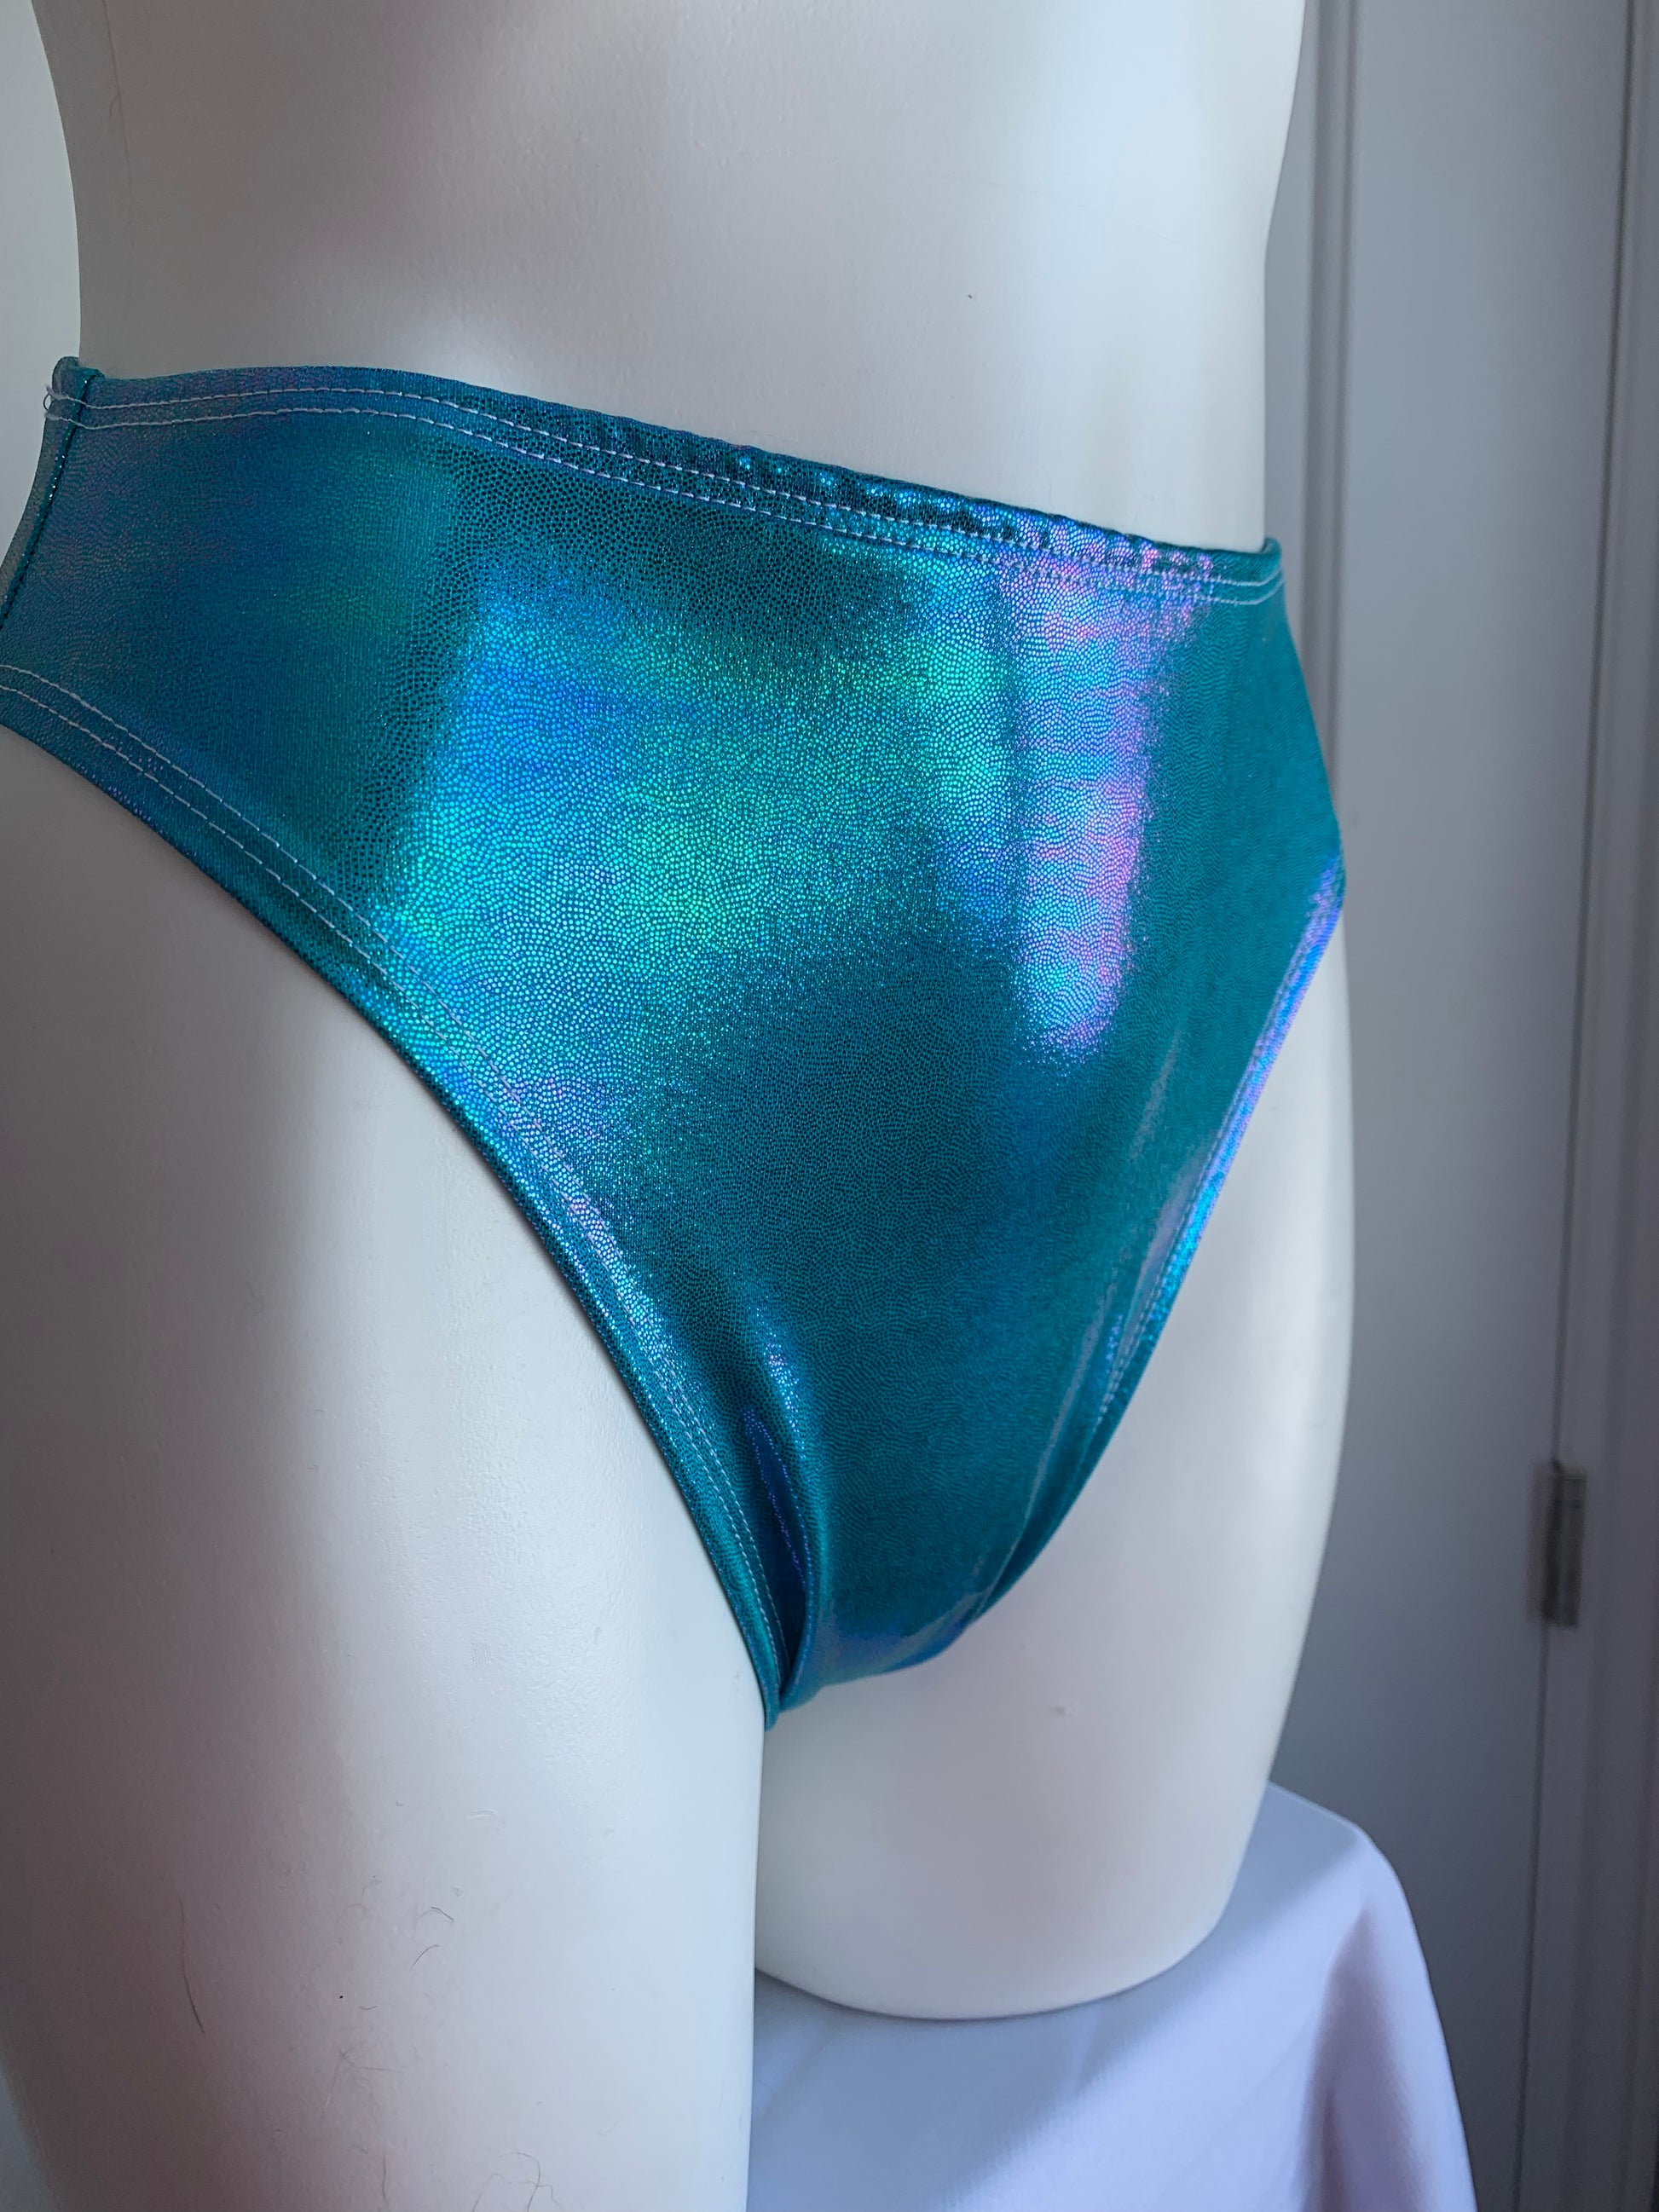 Holographic Rave Bottoms, High waisted, Cheeky, thigh high - Electric Couture Dolls